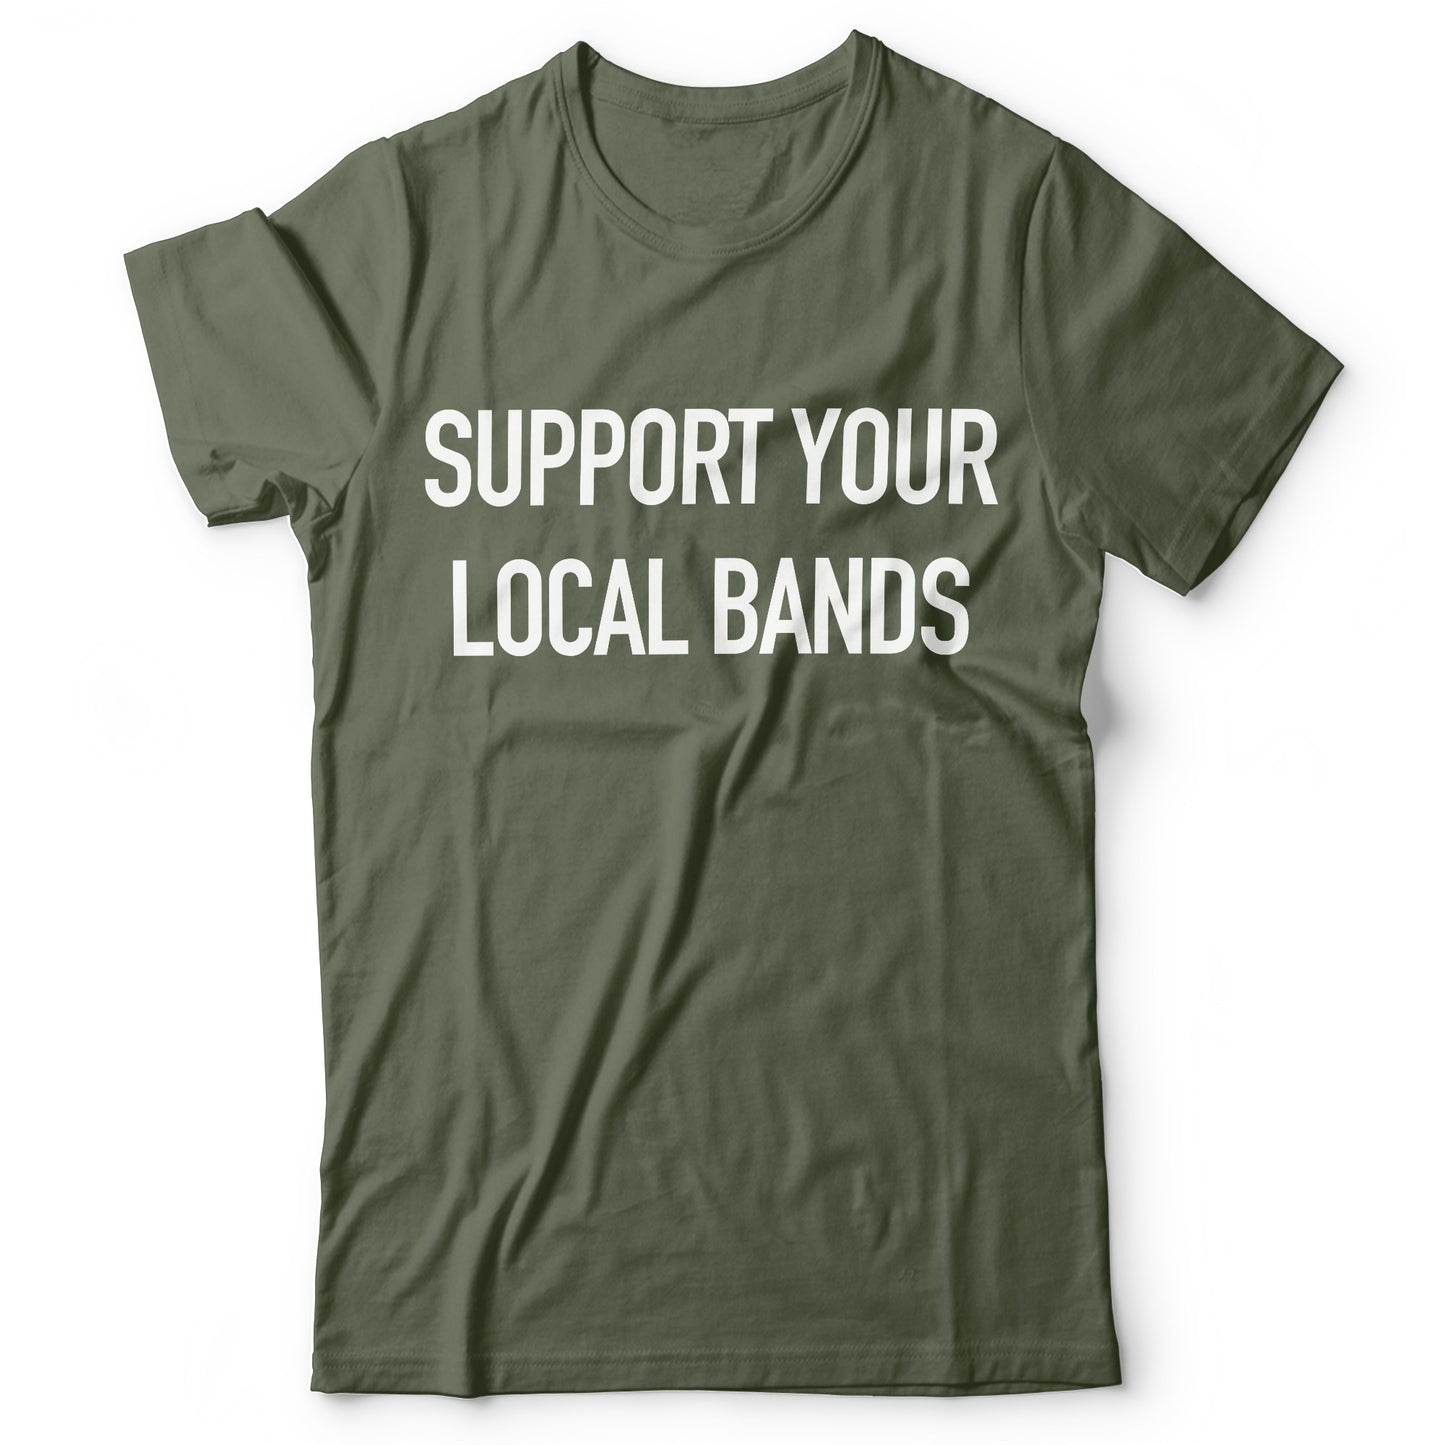 Support Your Local Bands - T-shirt